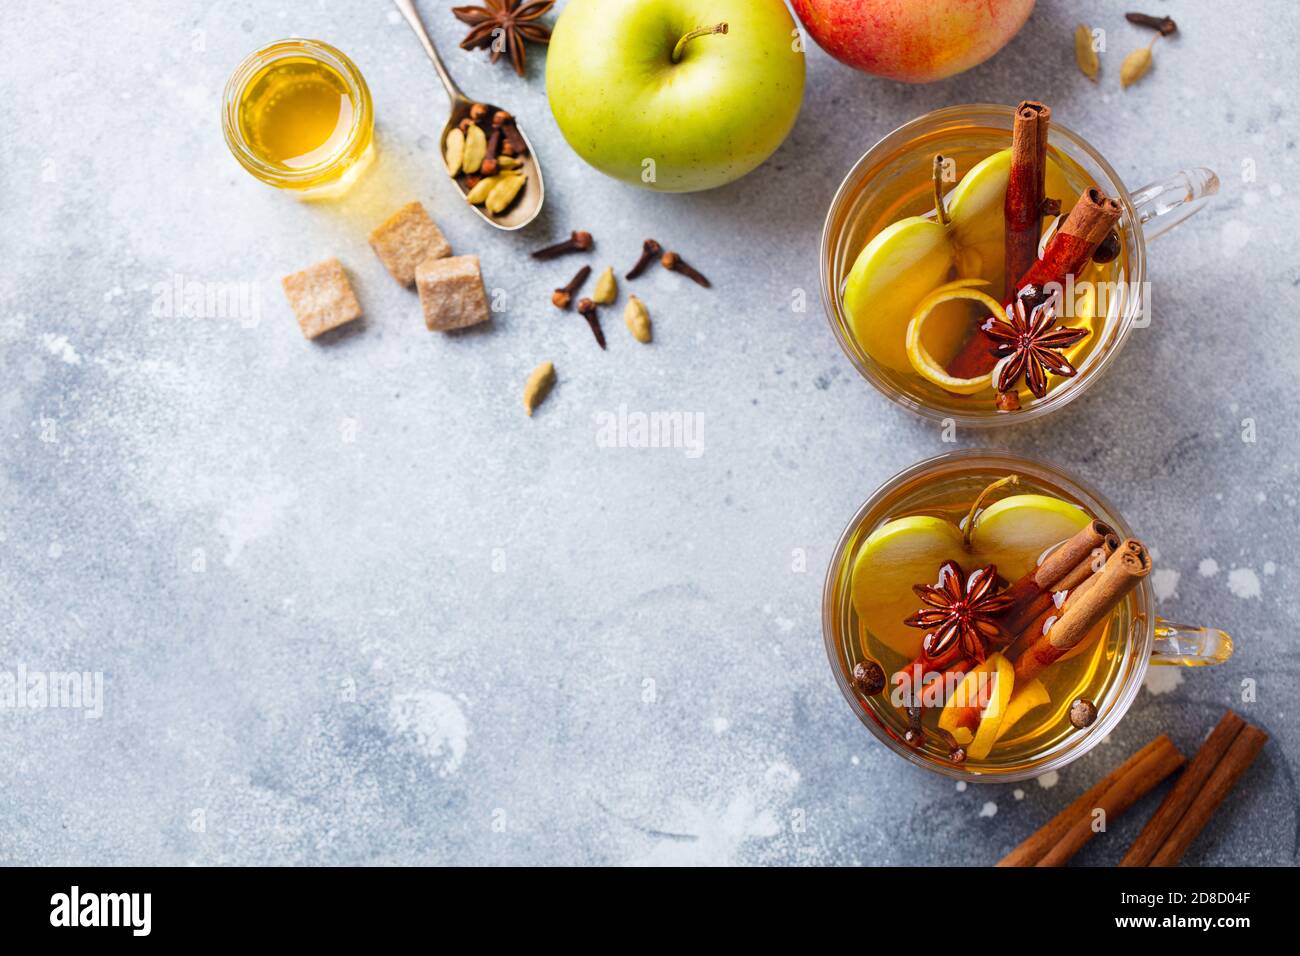 Apple mulled cider with spices in glass cup. Grey stone background. Copy spase. Top view. Stock Photo